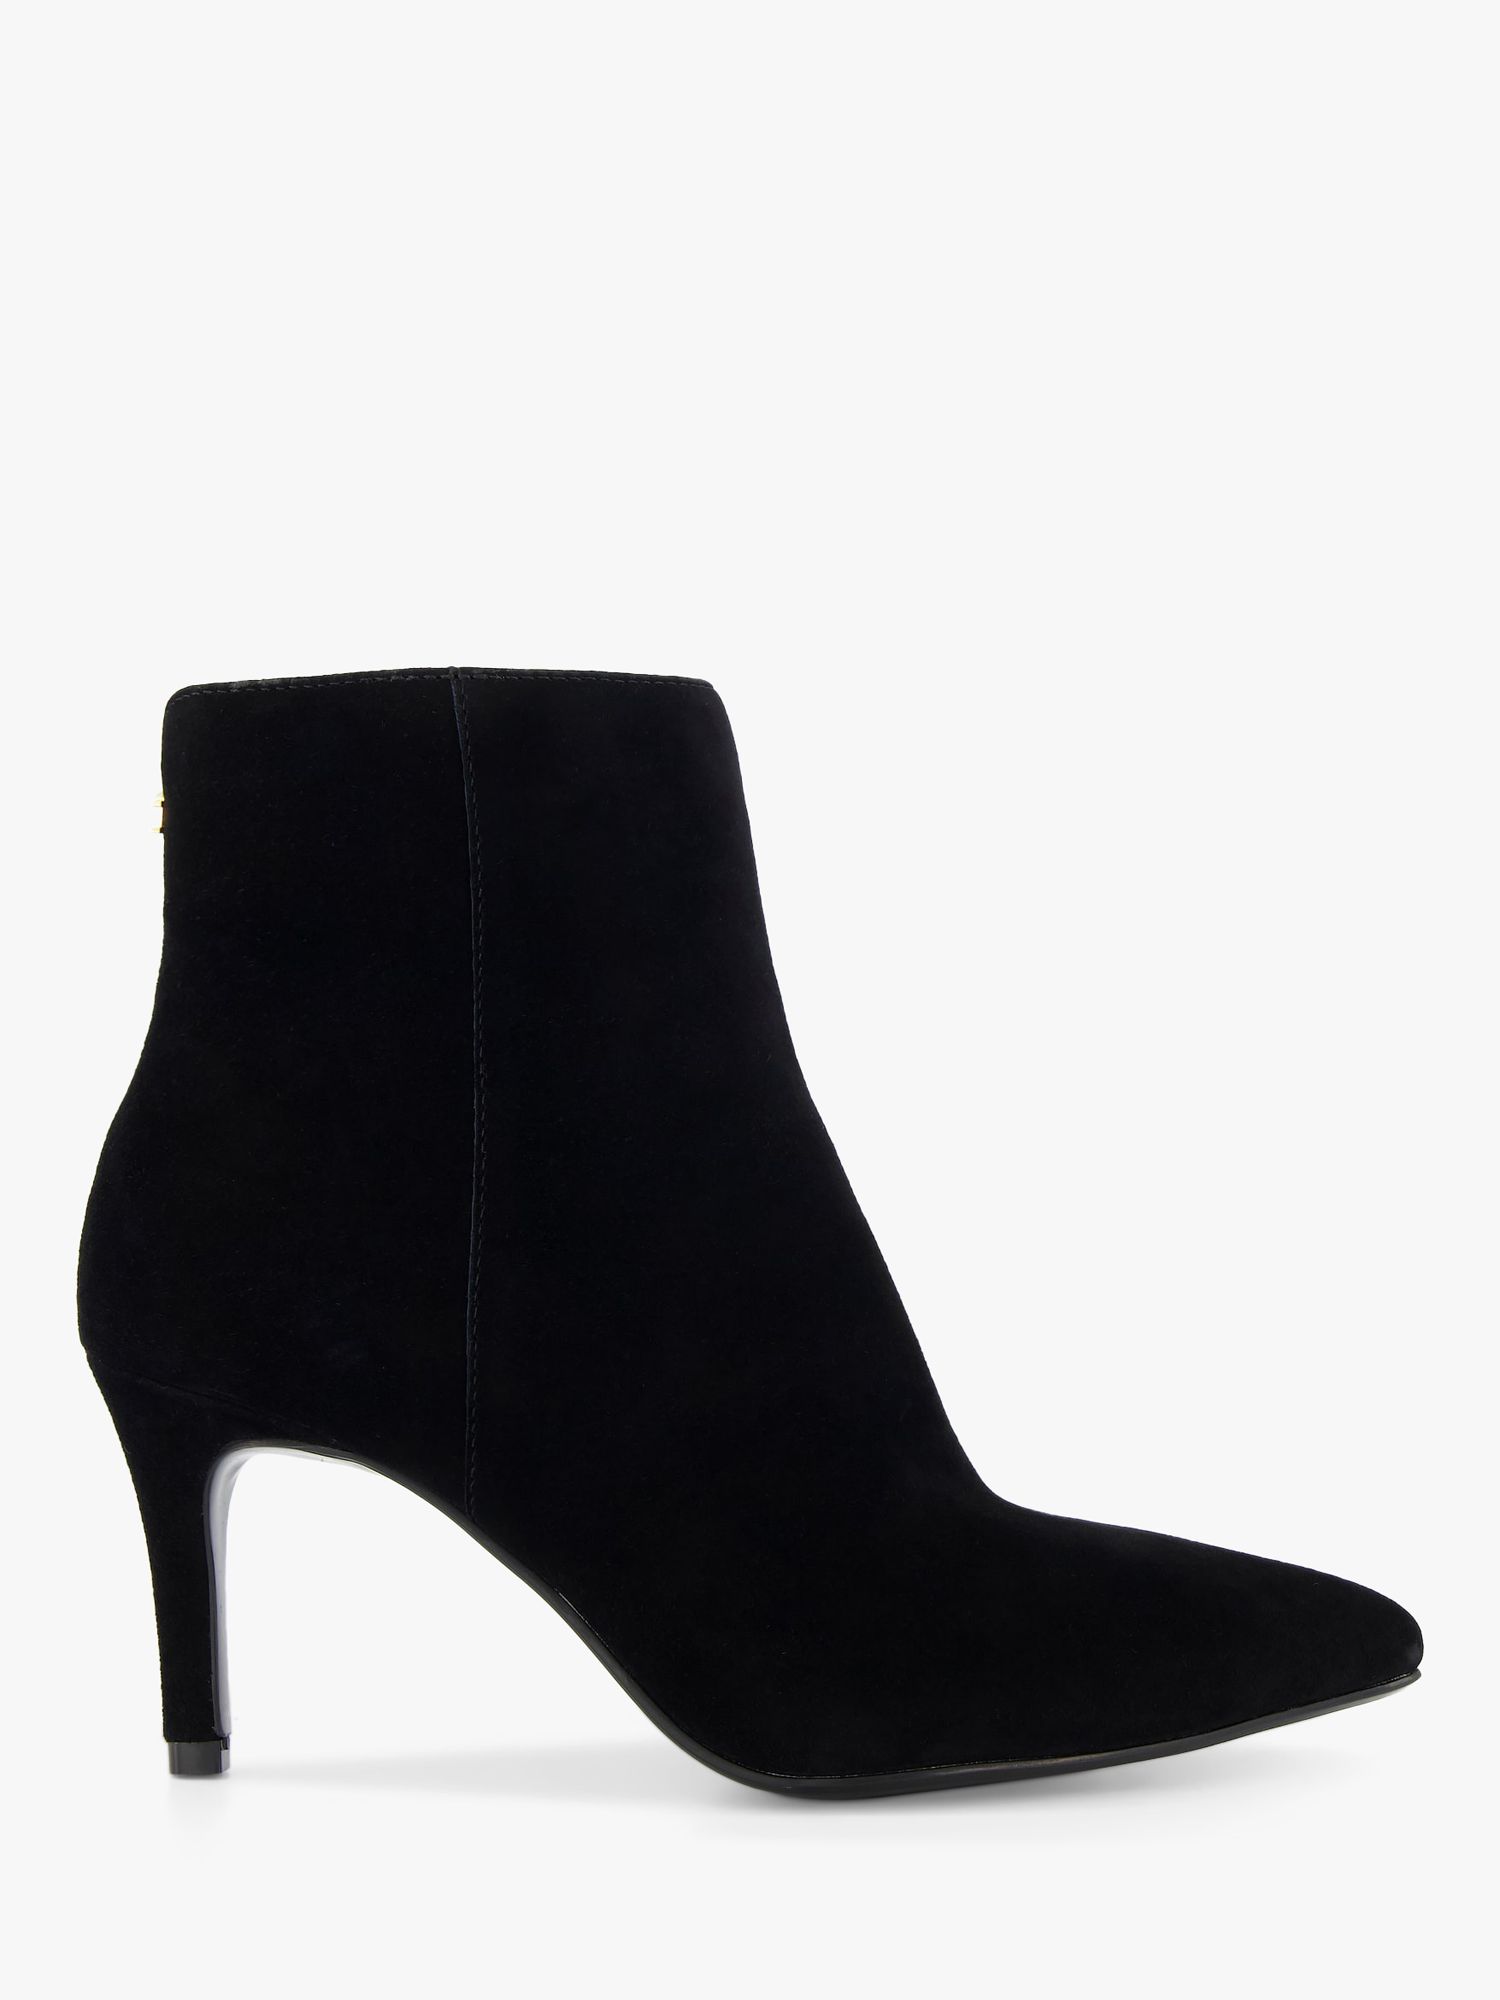 Dune Obsessive2 Suede Pointed Toe Ankle Boots at John Lewis & Partners